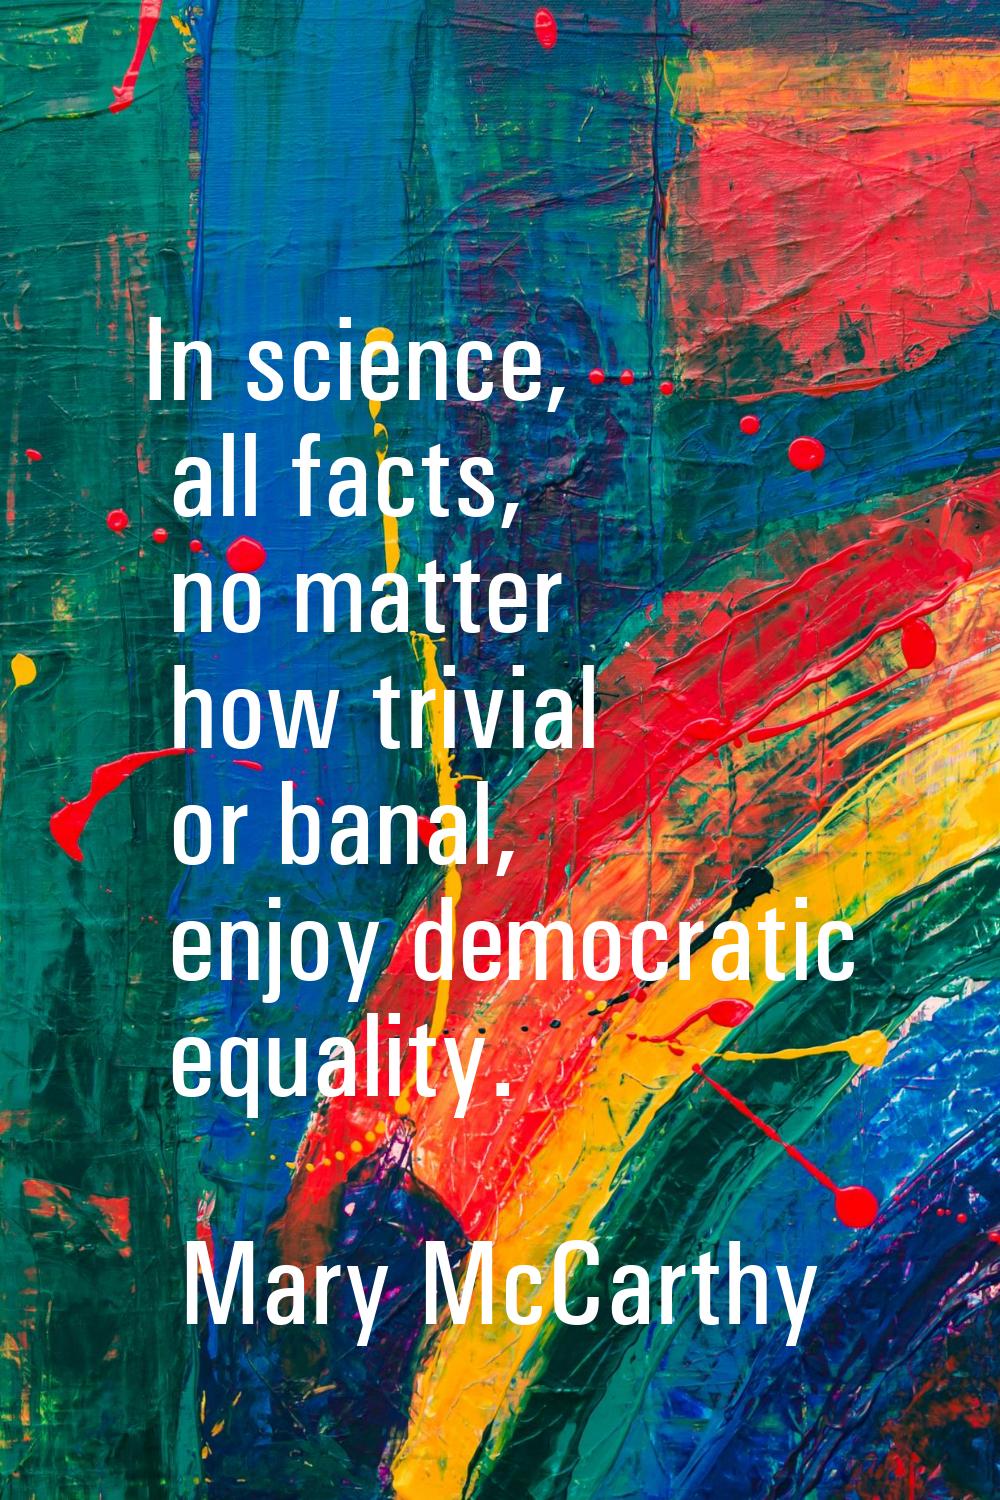 In science, all facts, no matter how trivial or banal, enjoy democratic equality.